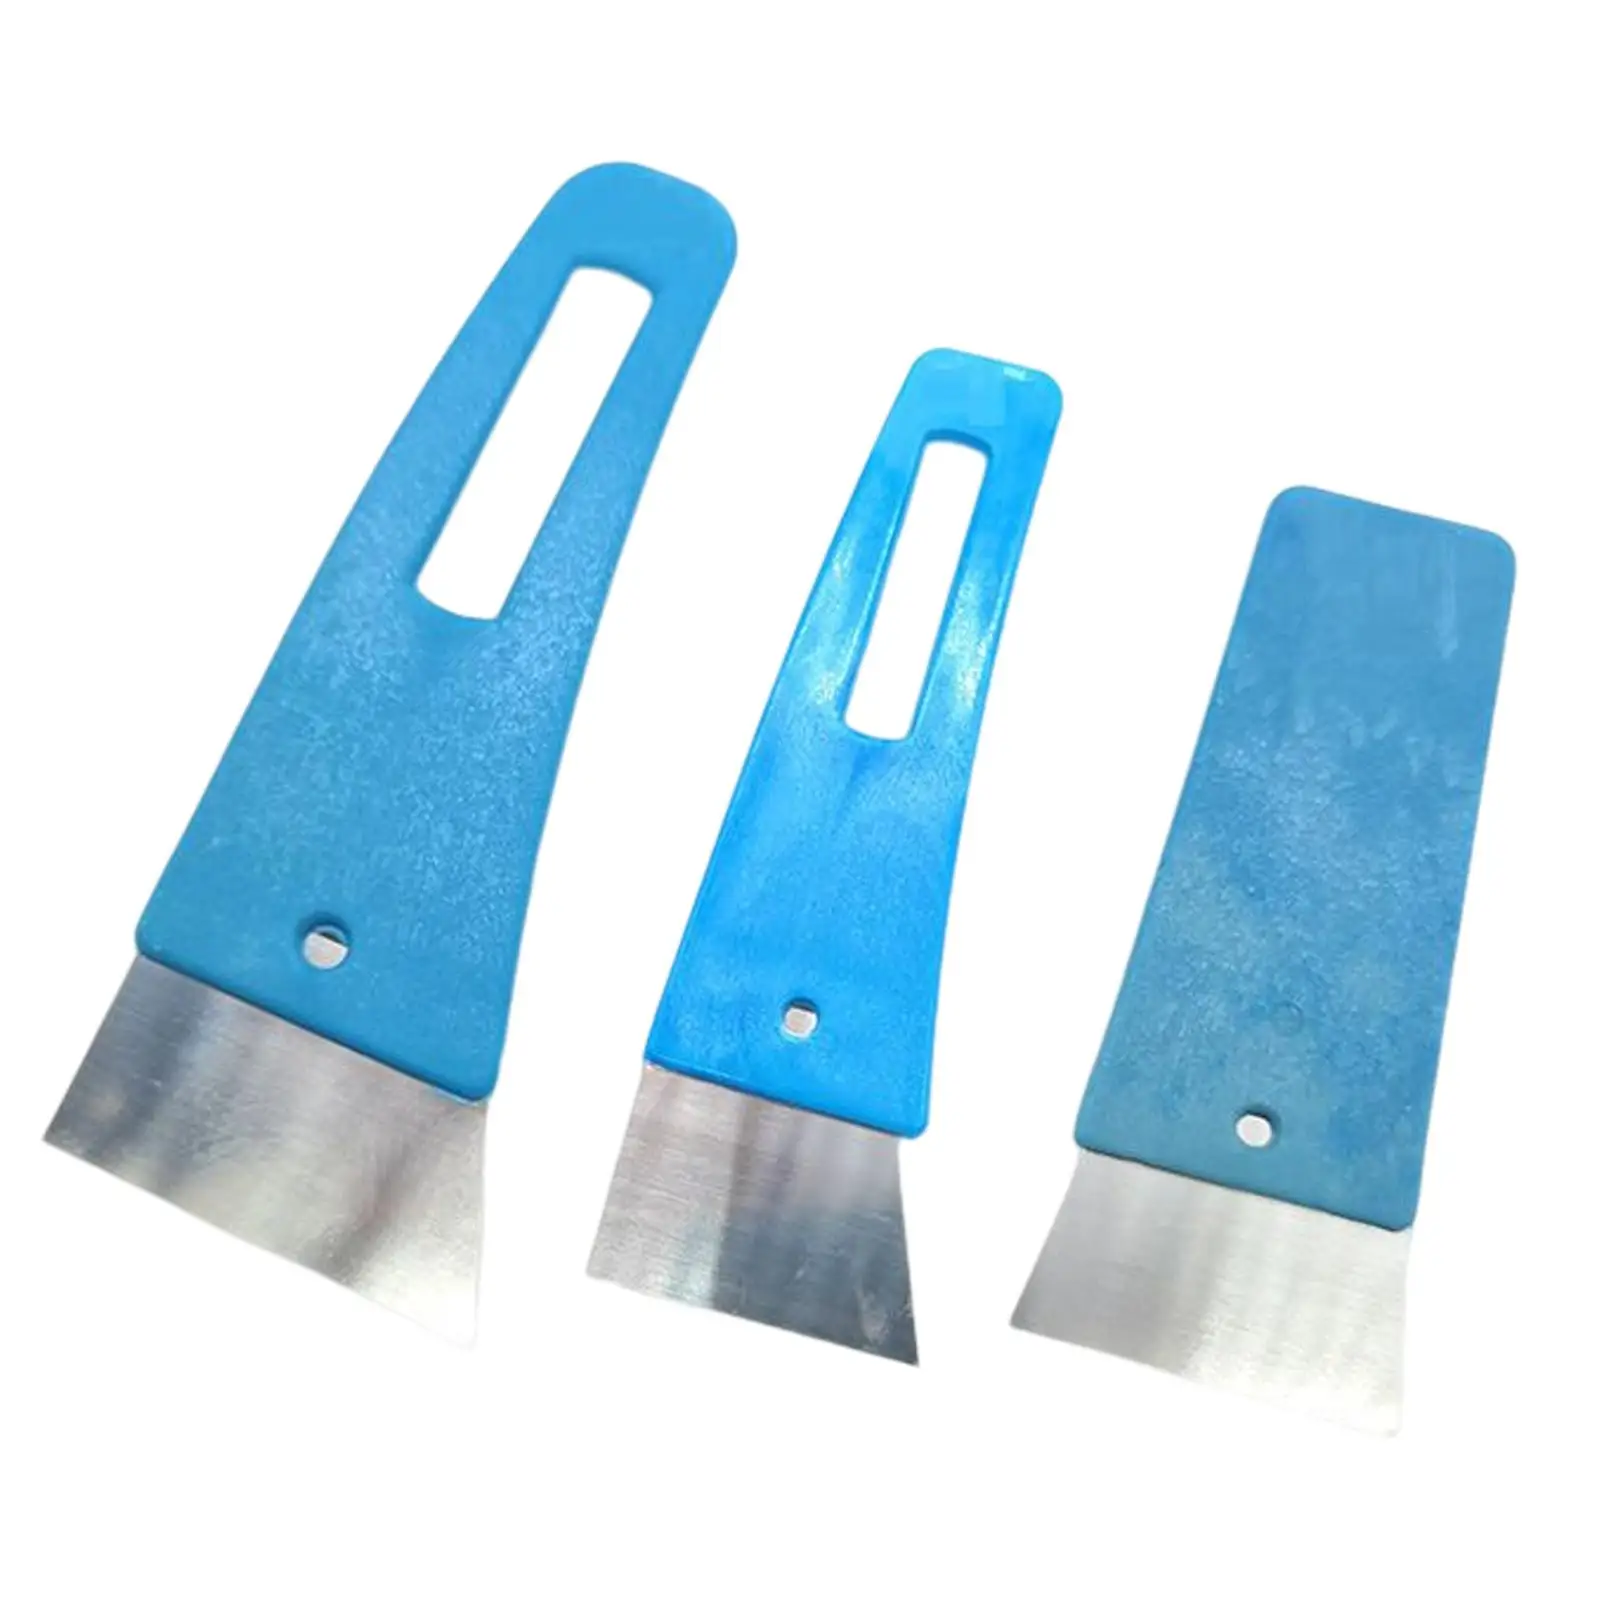 3 Pieces Car Window Film Scraper Squeegee Set Pushing Out Bubble Lines Improving